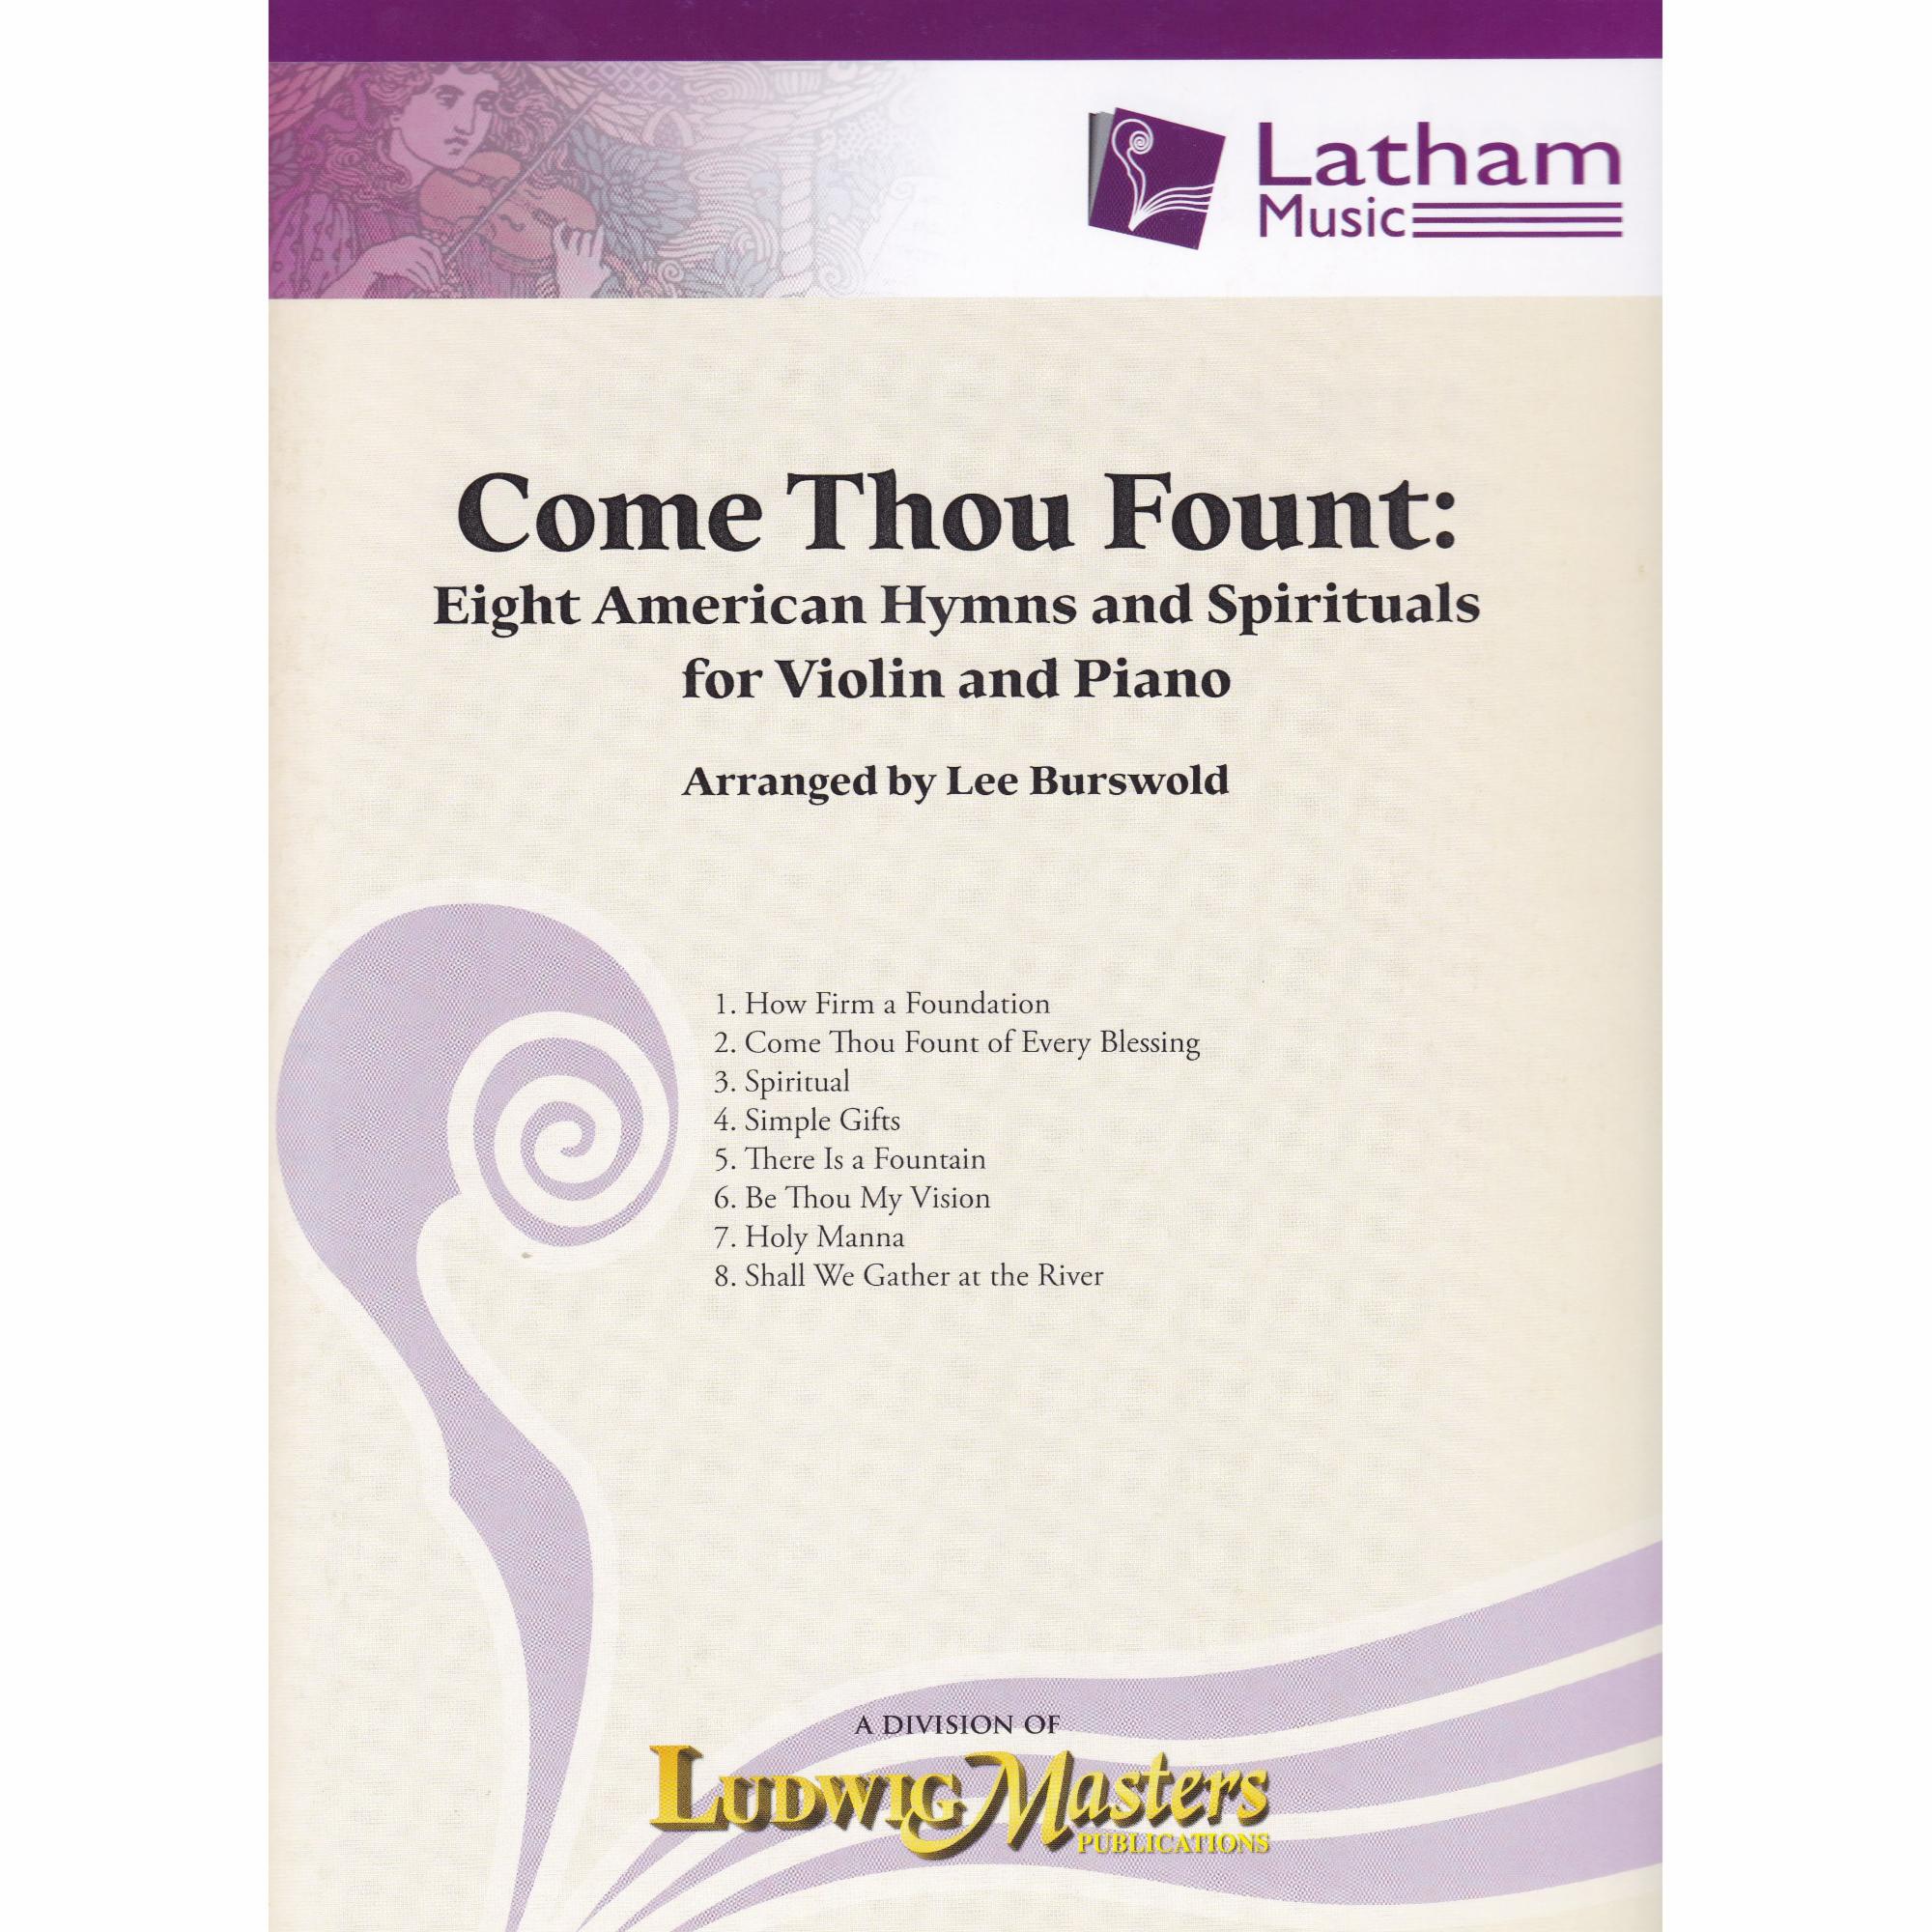 Come Thou Fount: Eight American Hymns and Spirituals